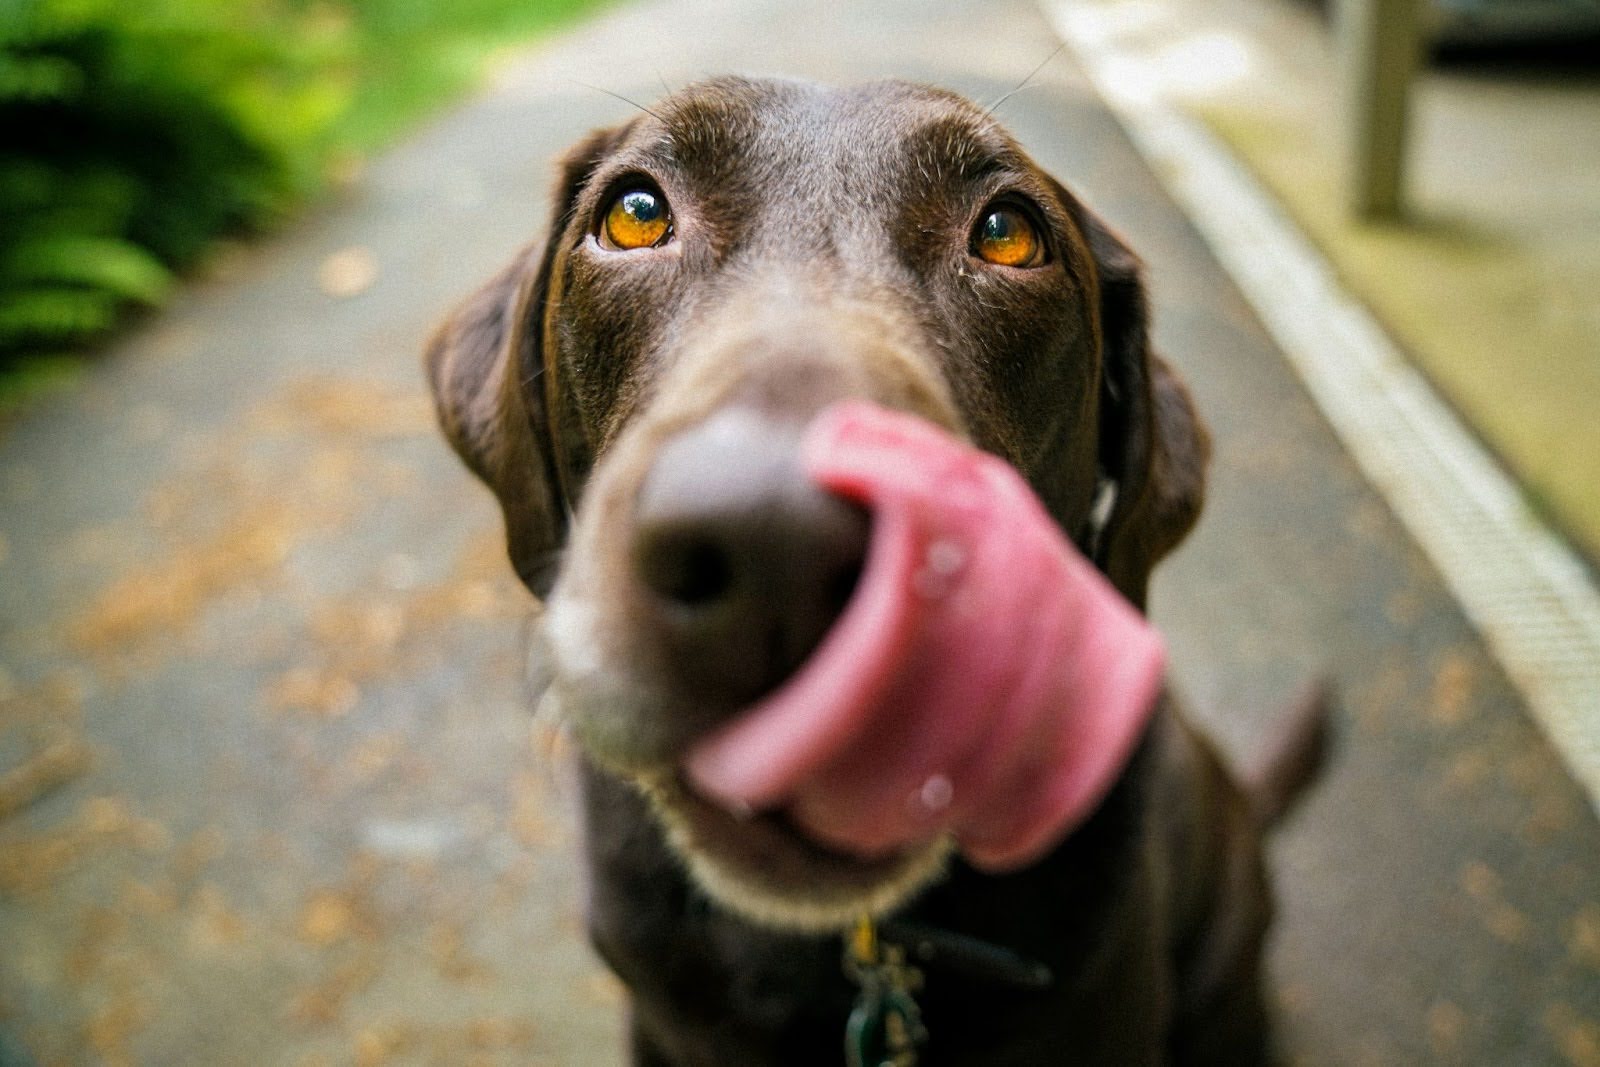 A beautiful chocolate lab licks its lips and nose.